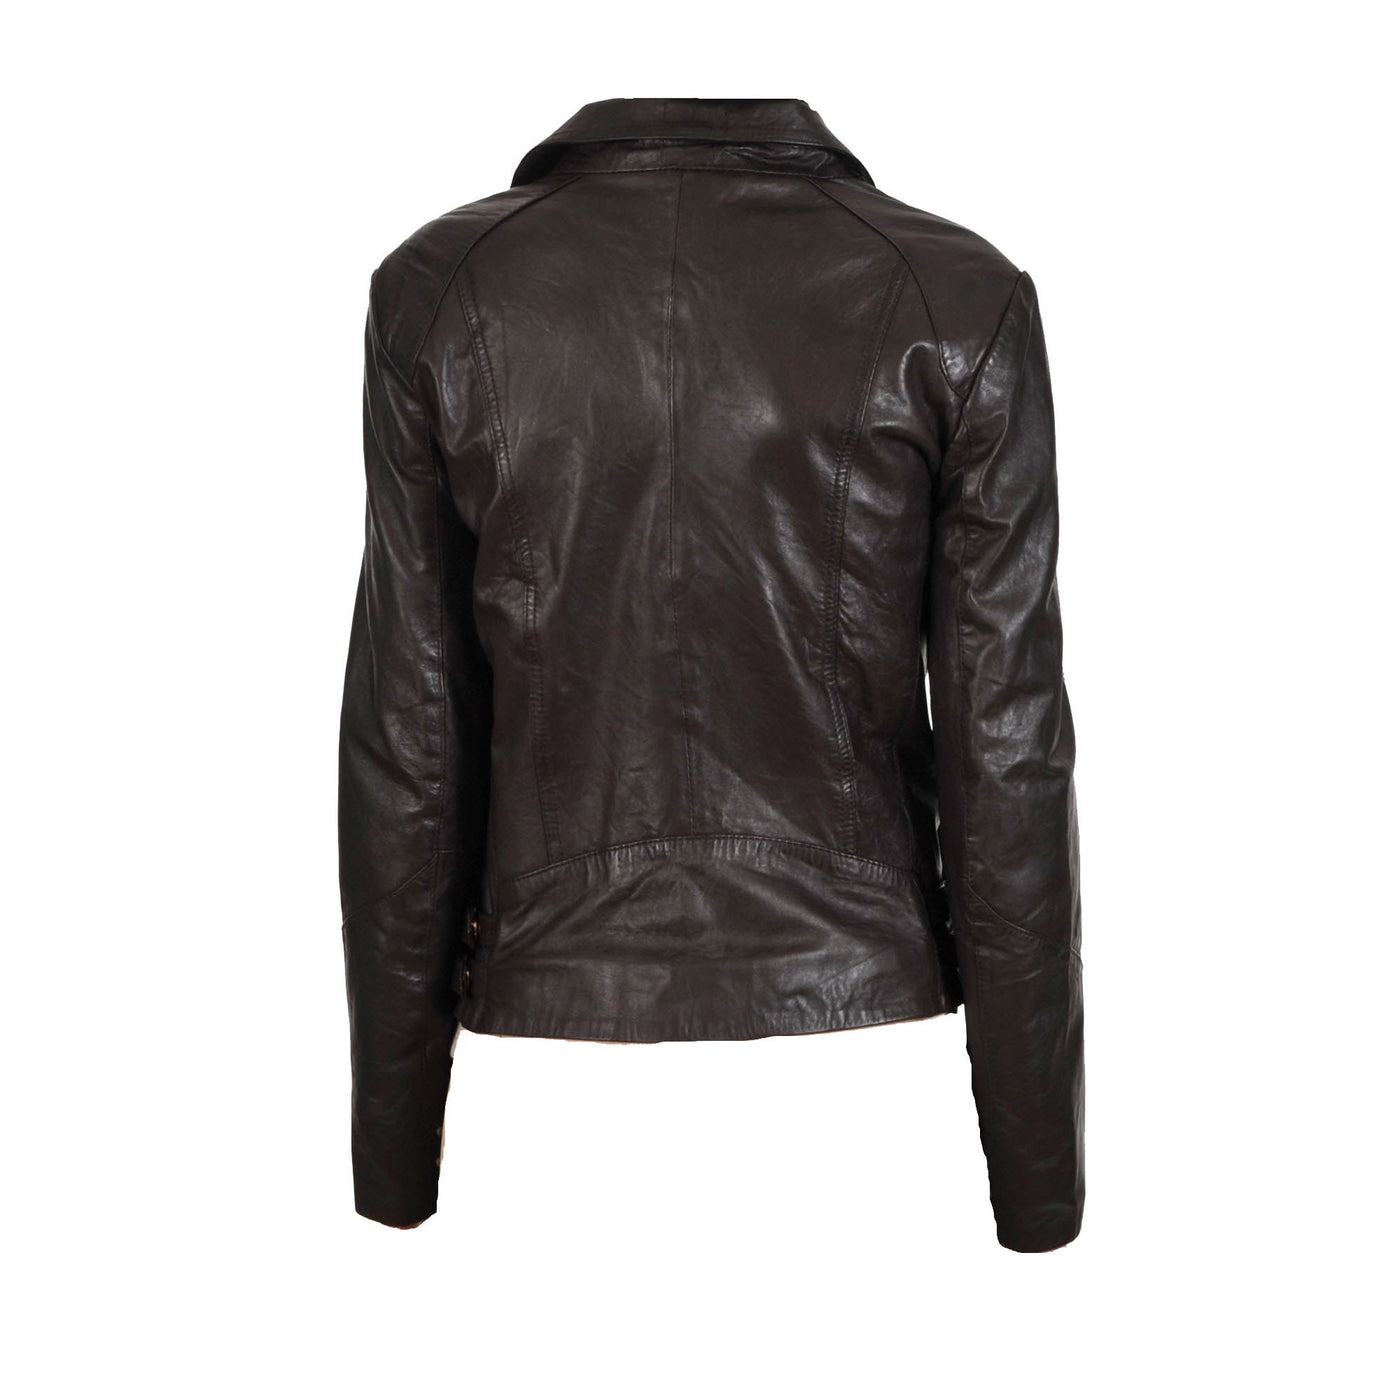 Women's classy brown leather jacket with collars - Lusso Leather - 2